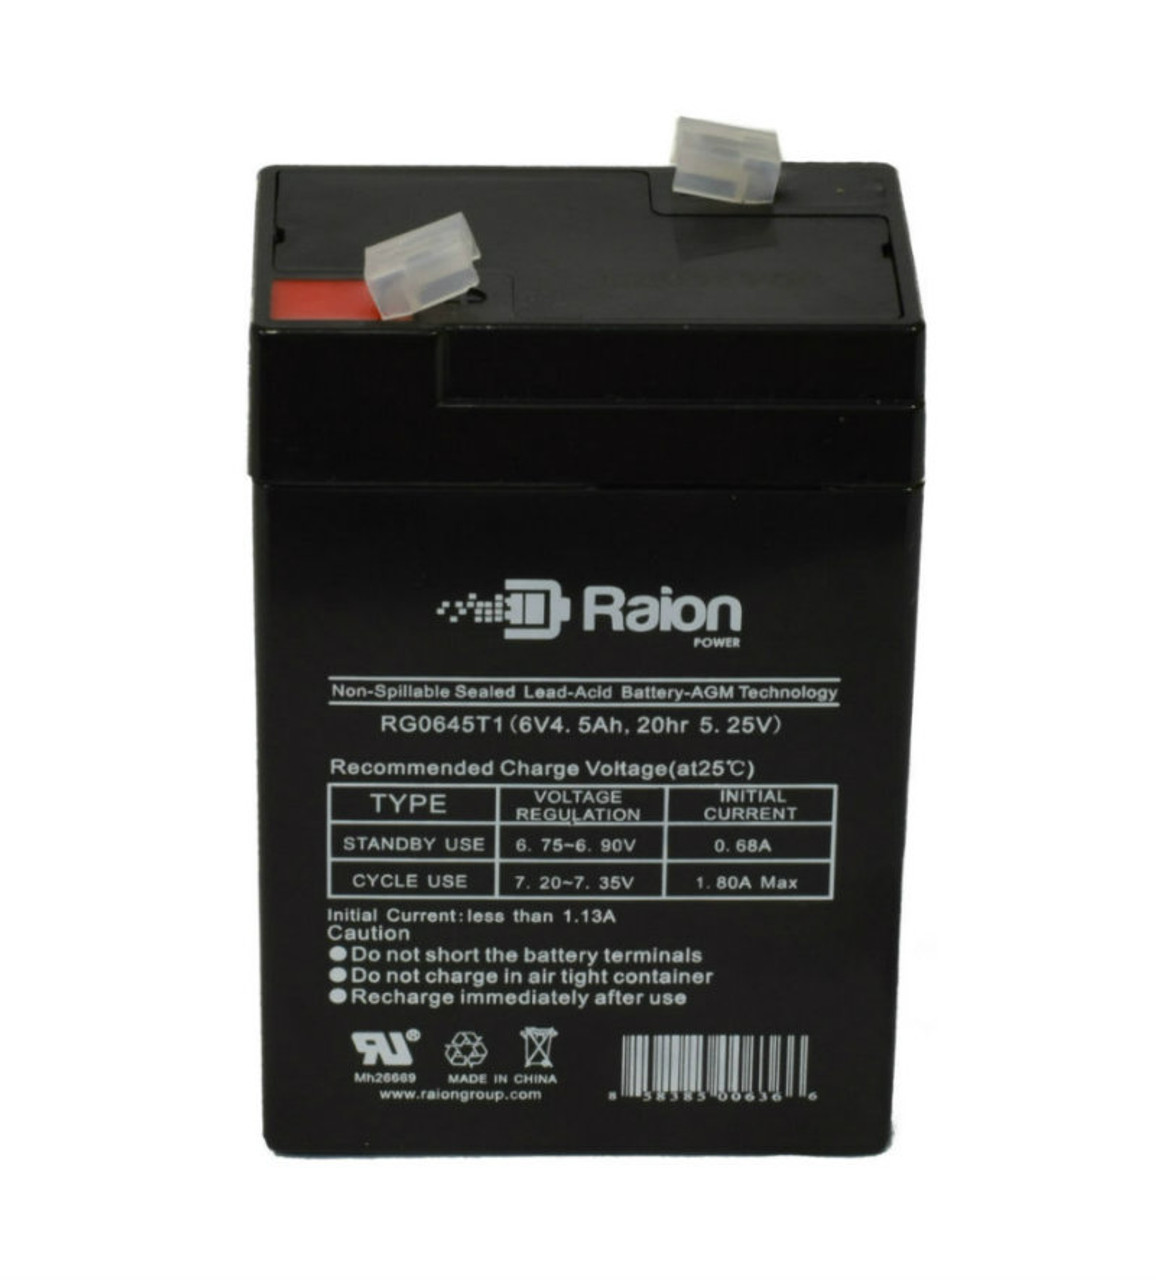 Raion Power RG0645T1 Replacement Battery Cartridge for Peg Perego IGED1112 6V Case IH Lil Tractor and Trailer